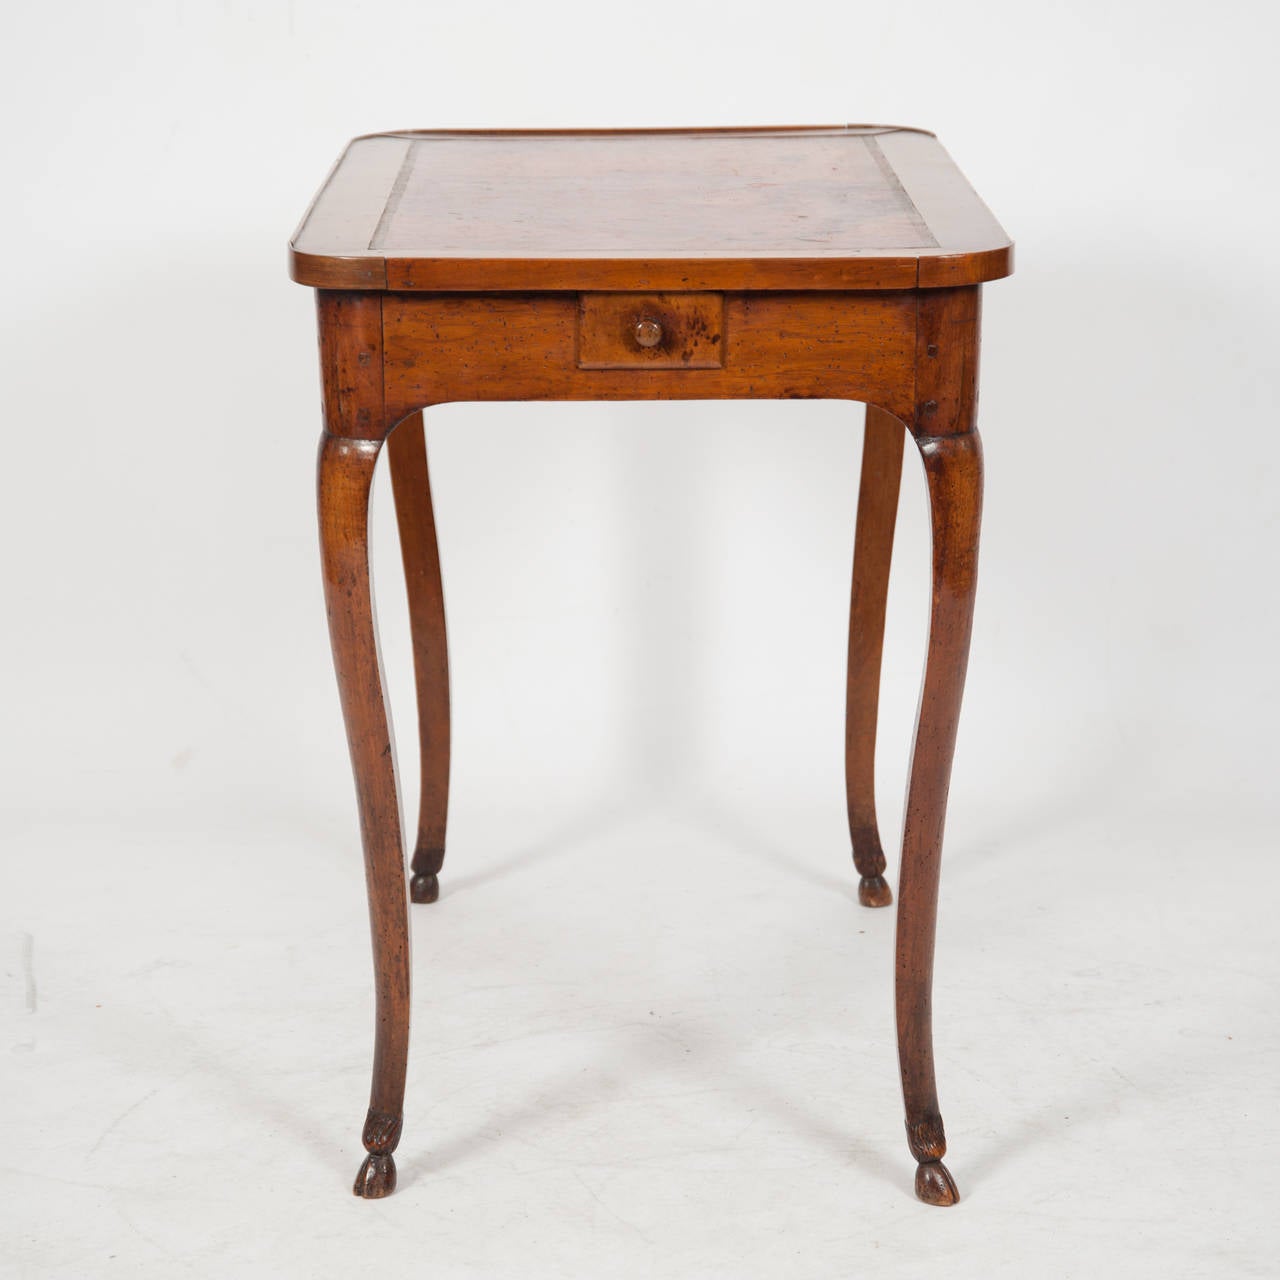 18th century French side table with leather top with radius corners single drawer above cabriole legs and hoof feet 

Height 700 
Length 765 
Depth 510